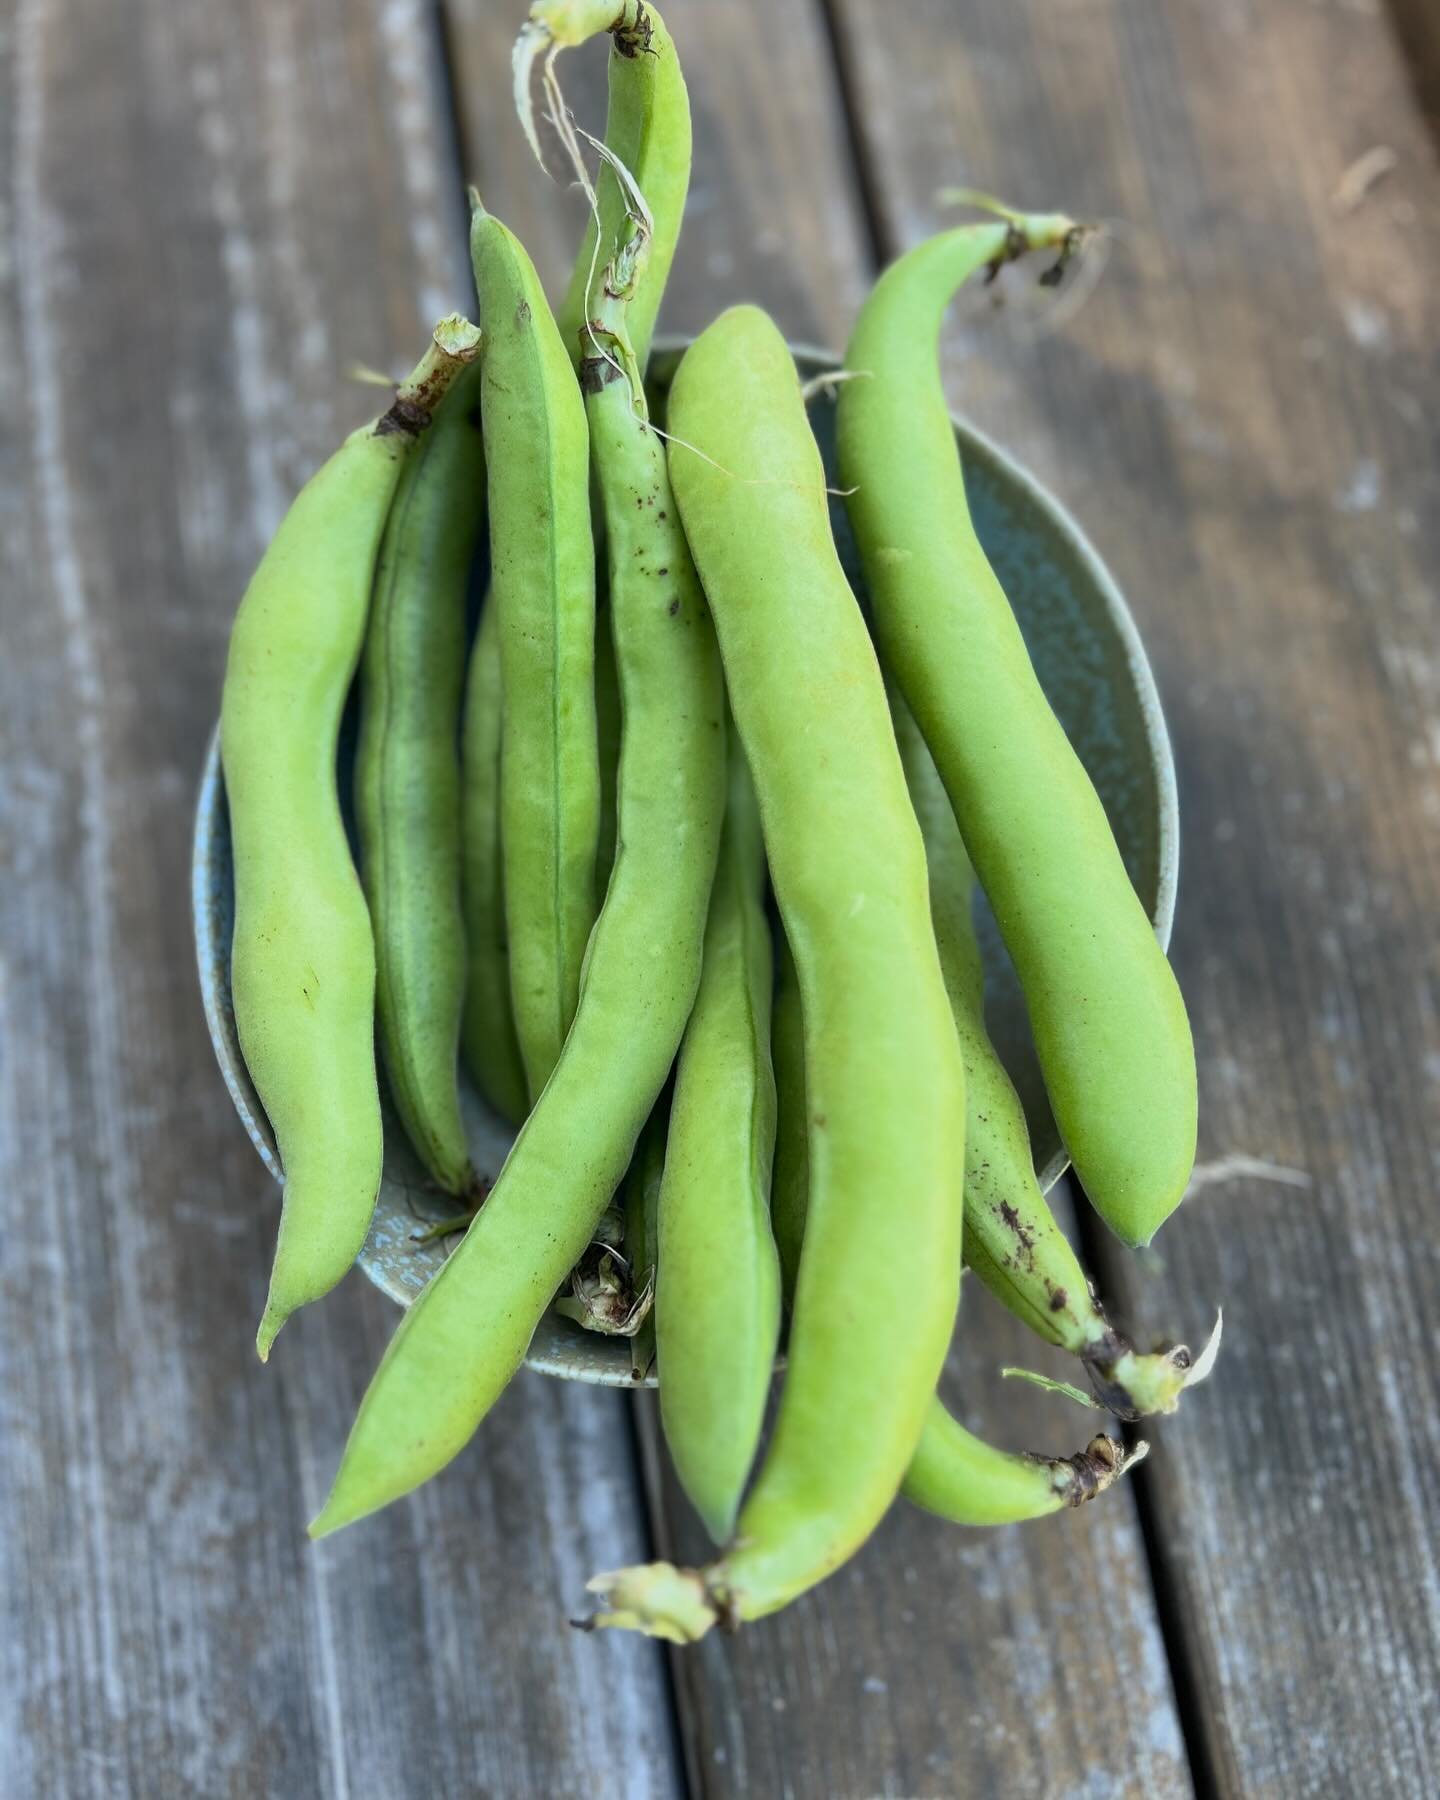 Let&rsquo;s chat about how to use fresh Fava Beans! These delicious and protein-packed legumes have been making their way into the spring FEED Bins lately. If you are unsure how to prep them or use them, we&rsquo;ve got you covered. 

🫛Prepping Fava